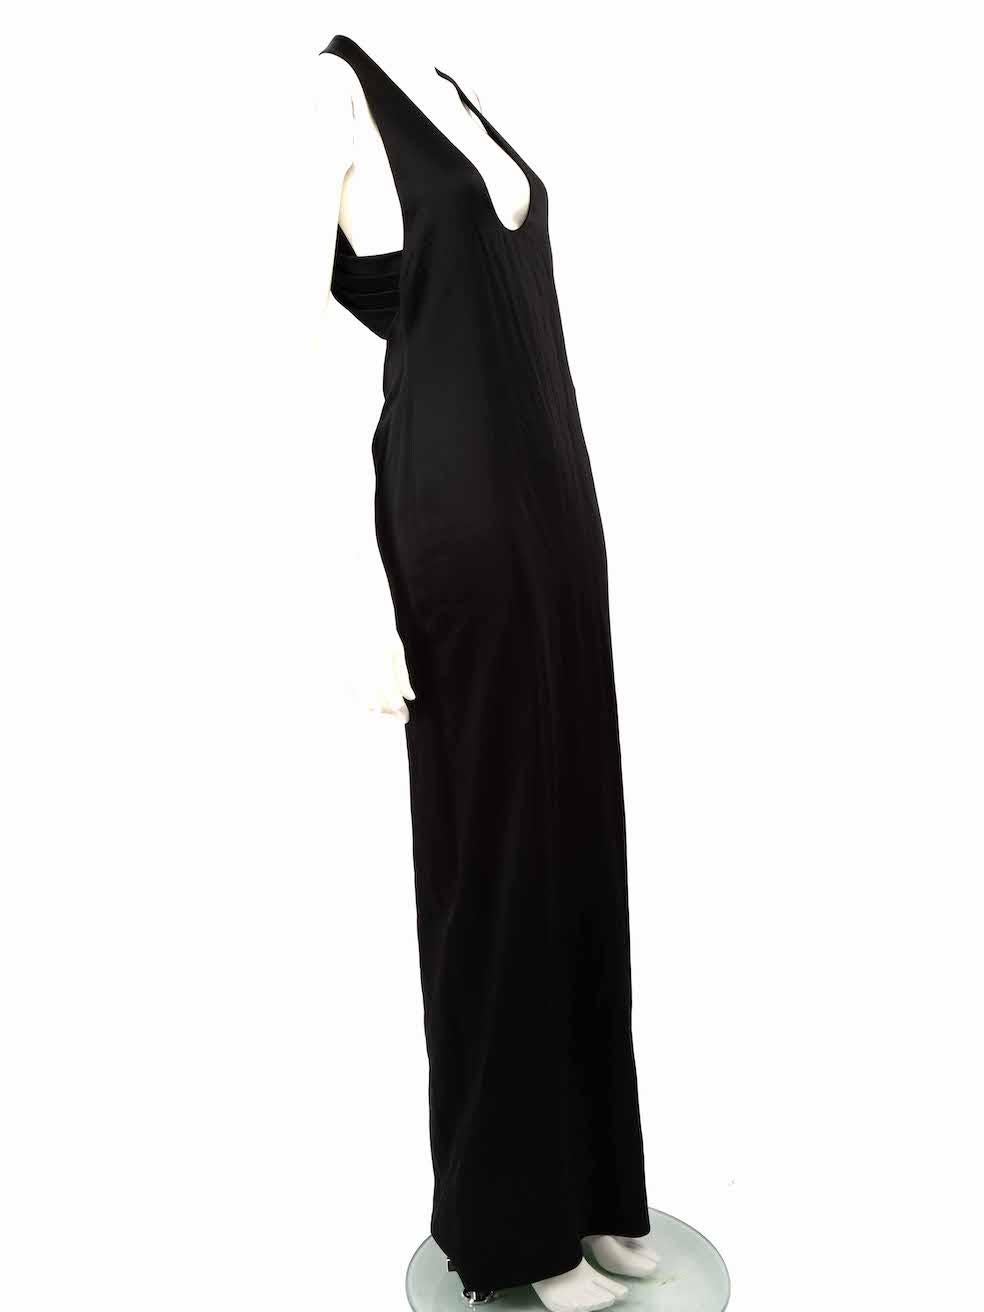 CONDITION is Never worn, with tags. No visible wear to dress is evident on this new Saint Laurent designer resale item.
 
 
 
 Details
 
 
 Black
 
 Synthetic
 
 Dress
 
 Sleeveless
 
 Open back
 
 Back strappy detail
 
 Sleeveless
 
 Maxi
 
 Round